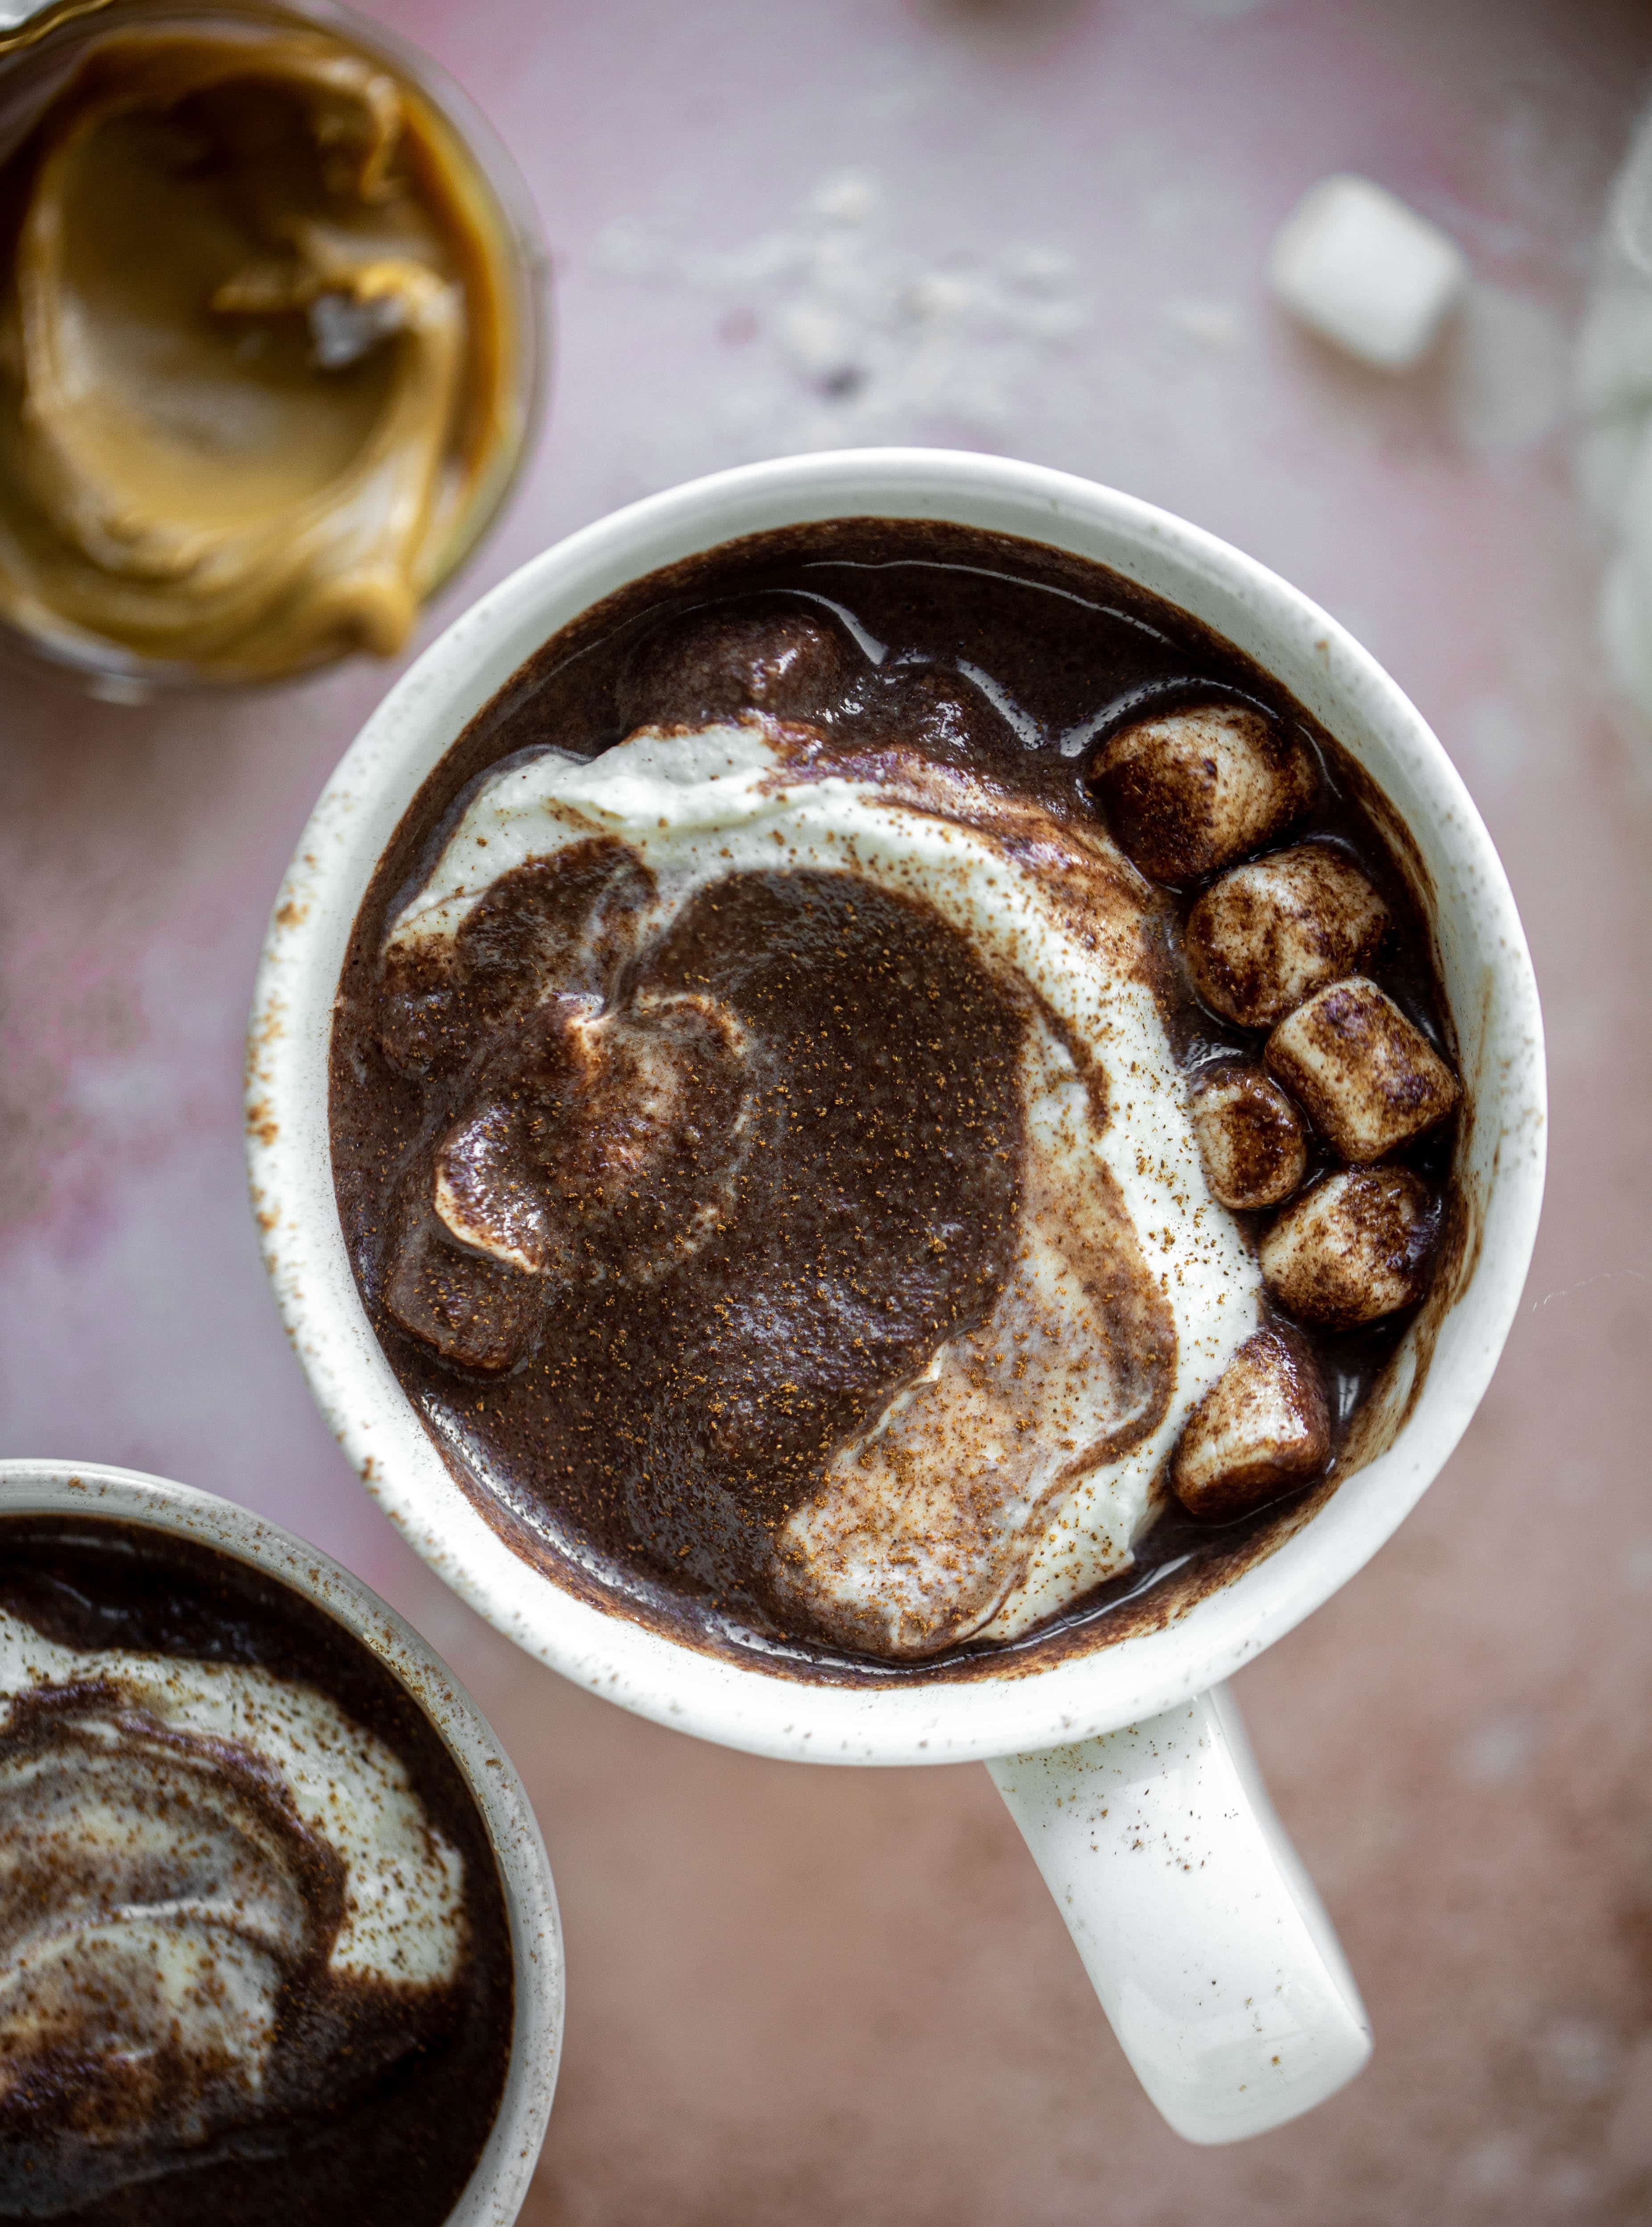 This salted peanut butter hot chocolate is a hug in a mug! It's super decadent, indulgent and cozy. Everyone's favorite flavors in one drink!